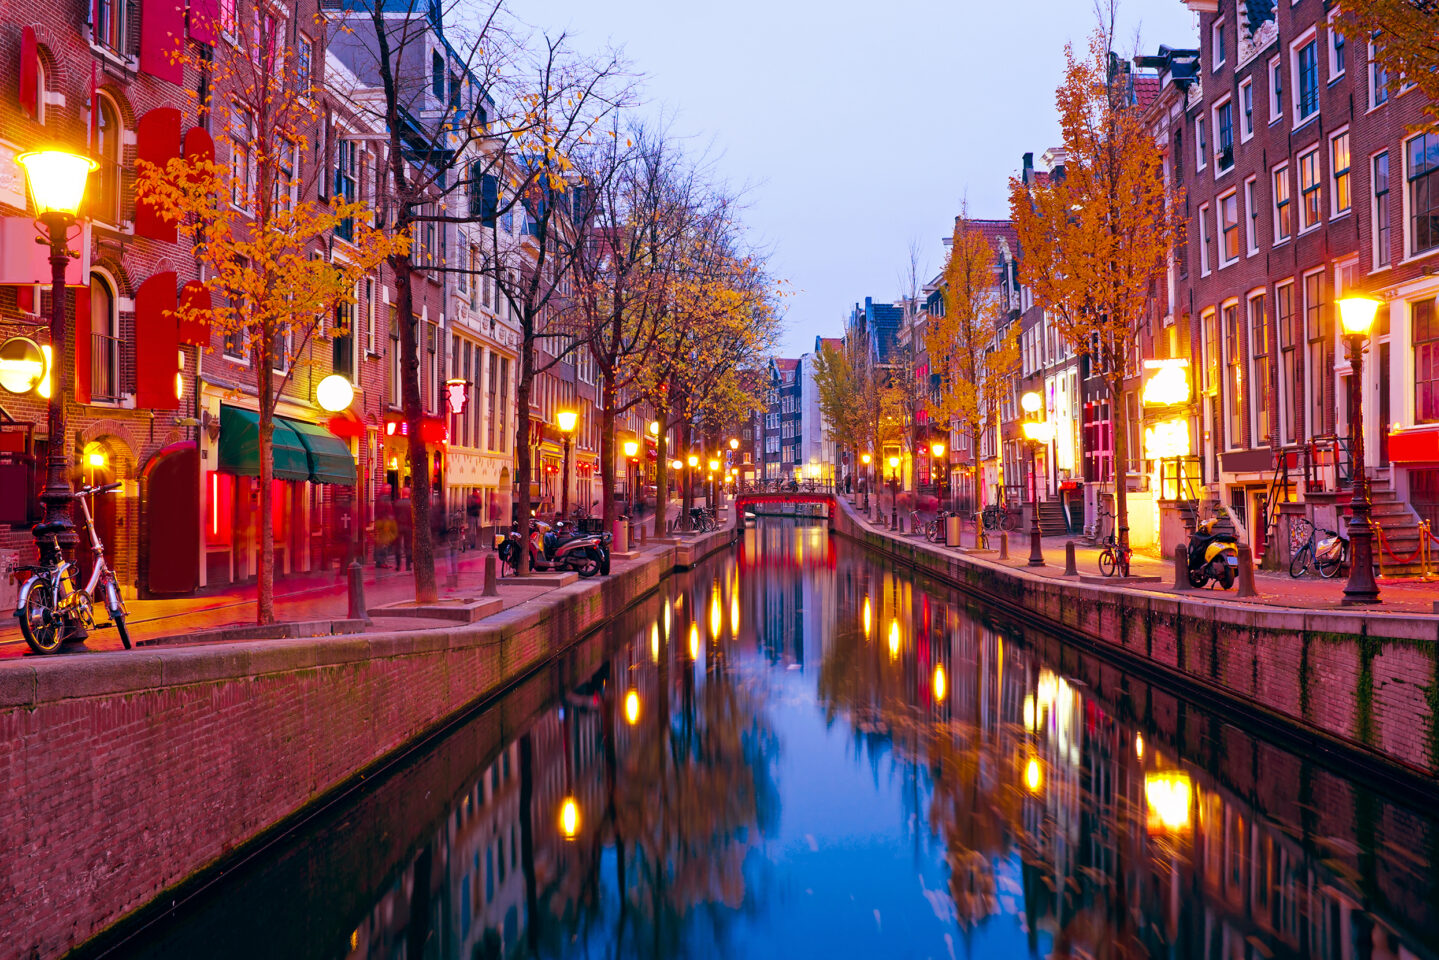 Amsterdam Bans Cannabis Use on Streets of Red Light District